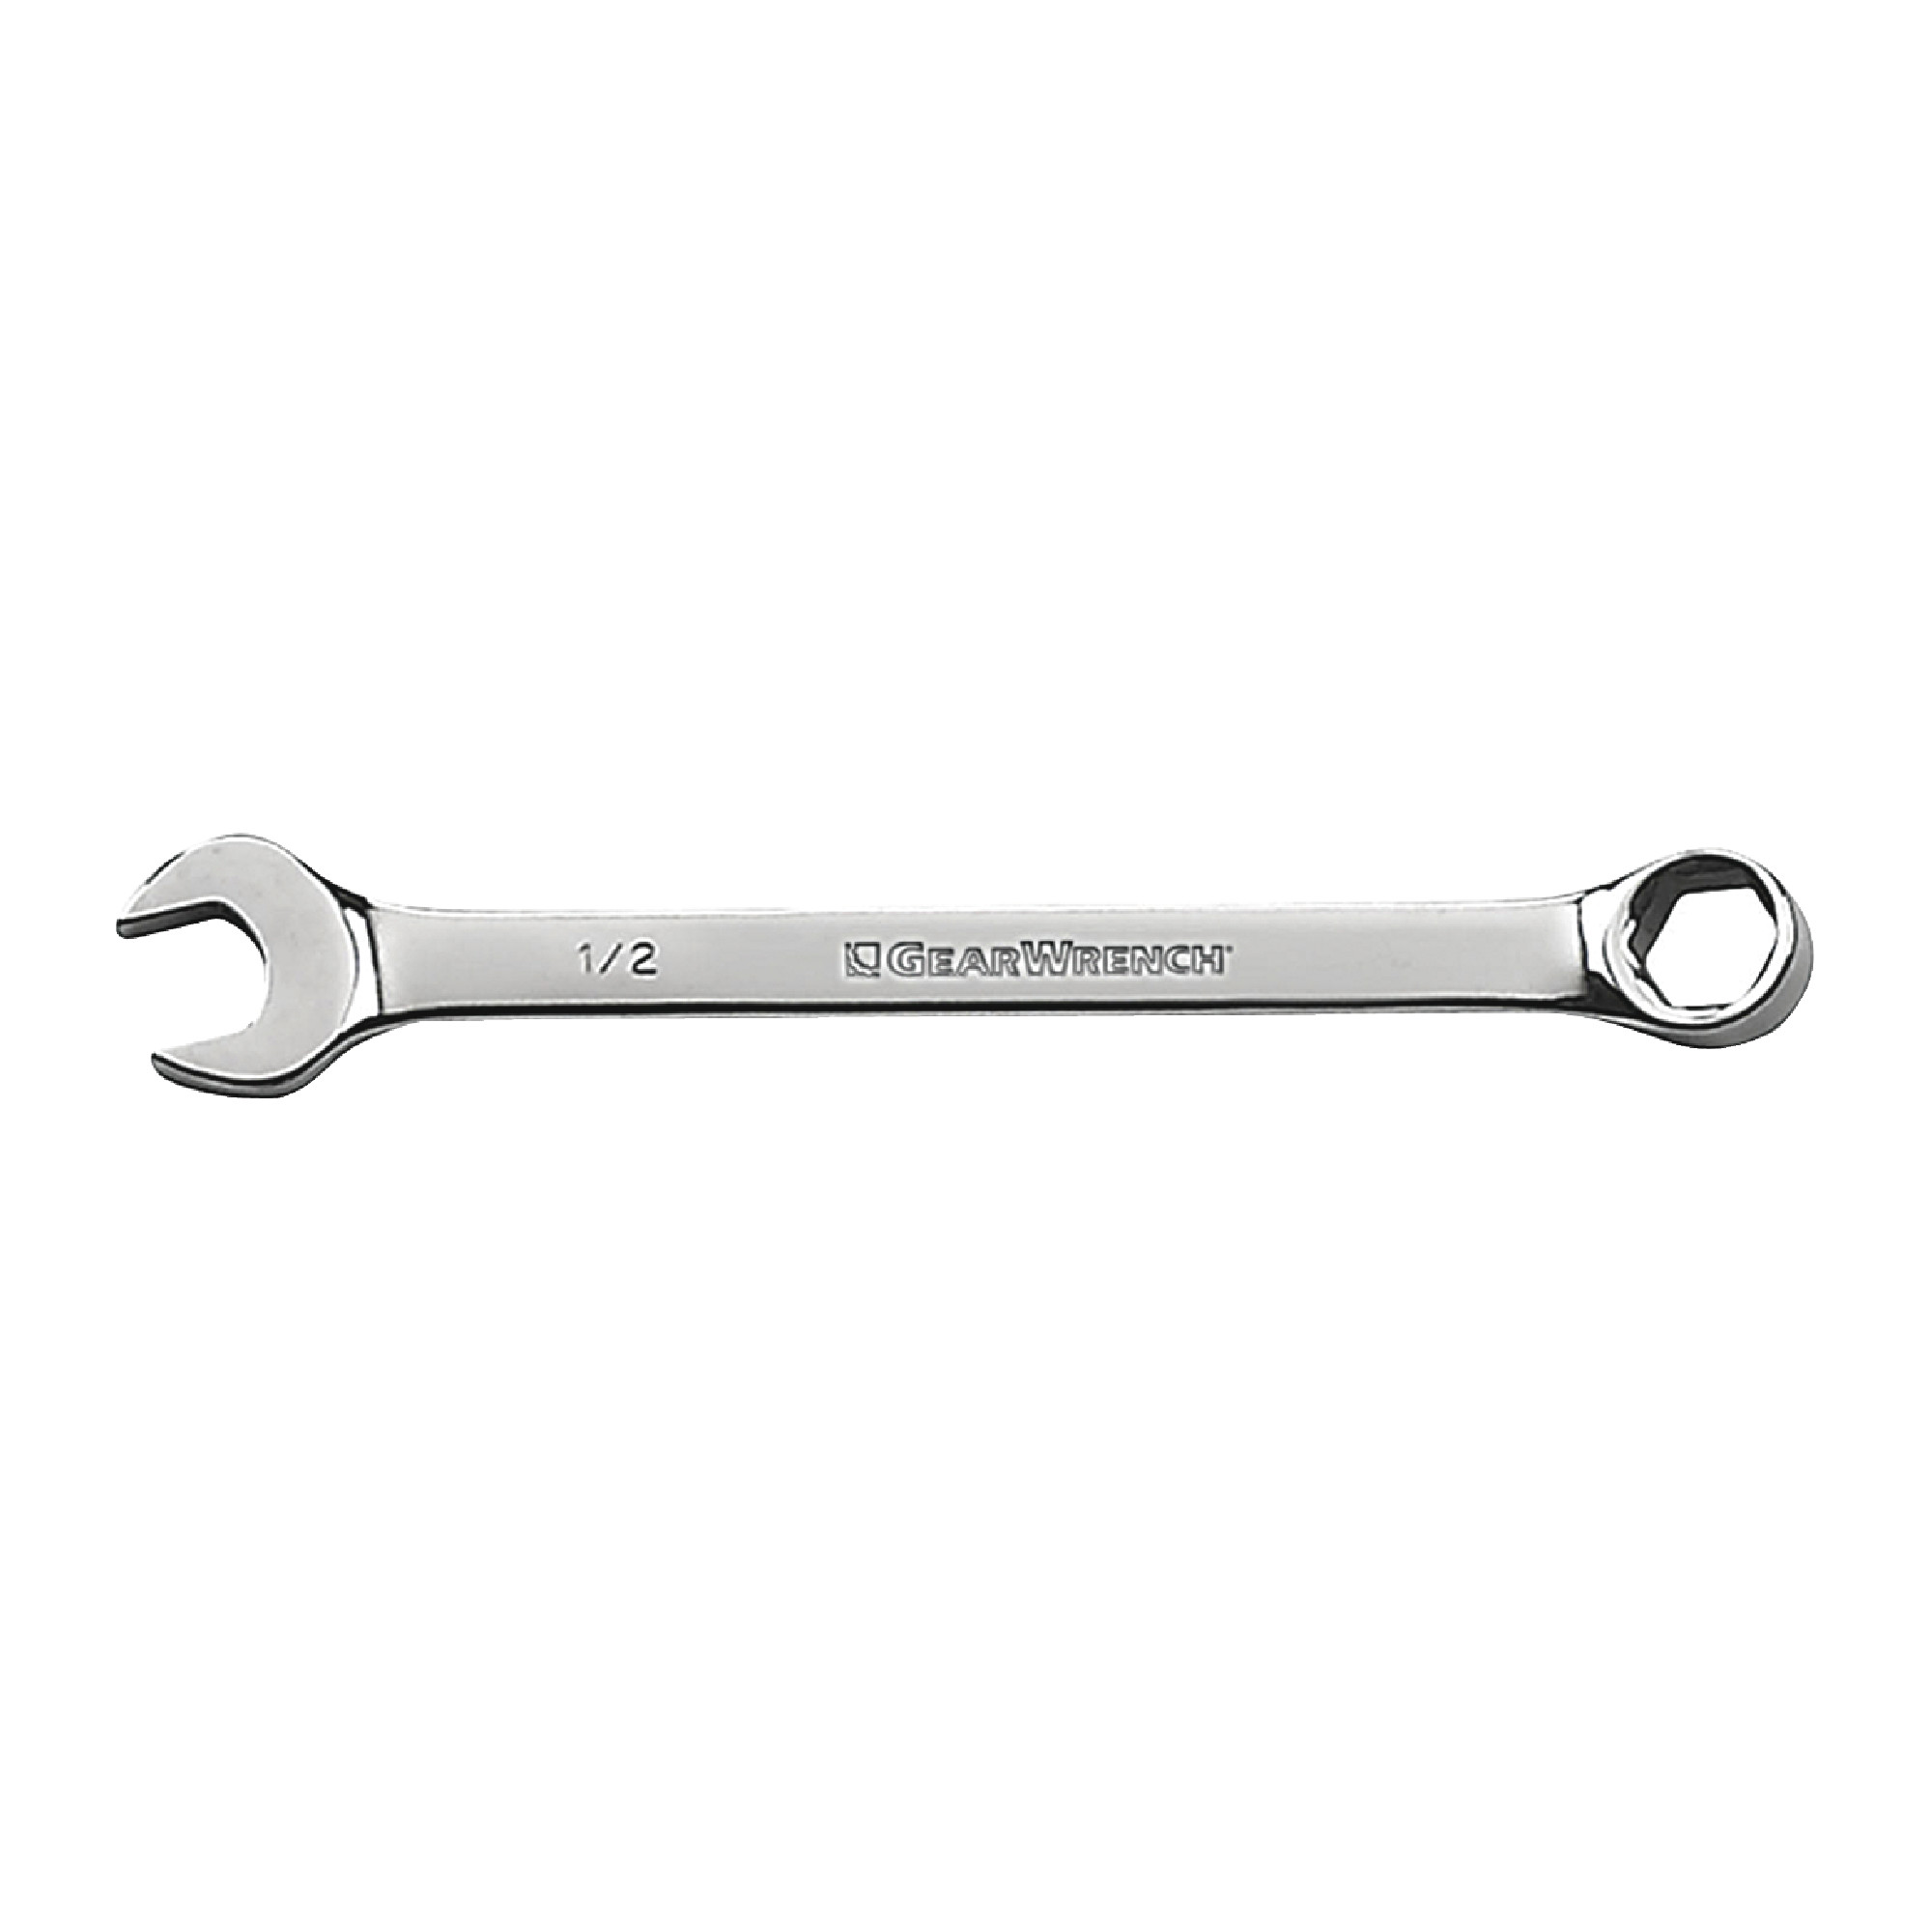 1/4" 6 Point Combination Wrench